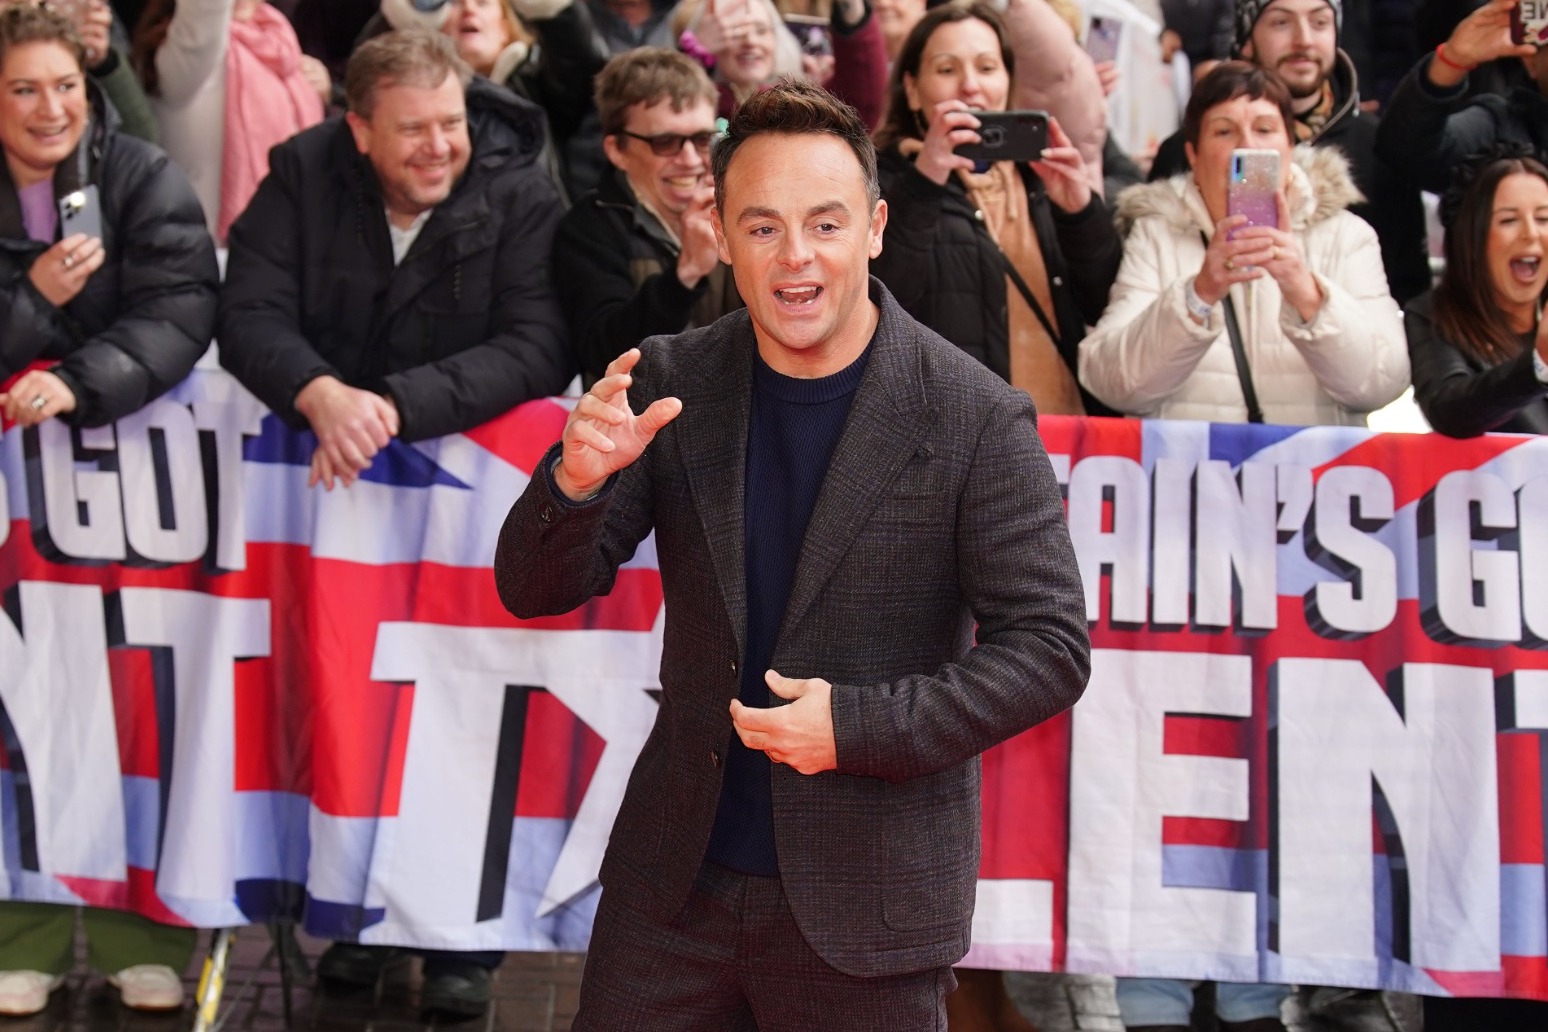 Willoughby and Deeley congratulate new dad Ant McPartlin